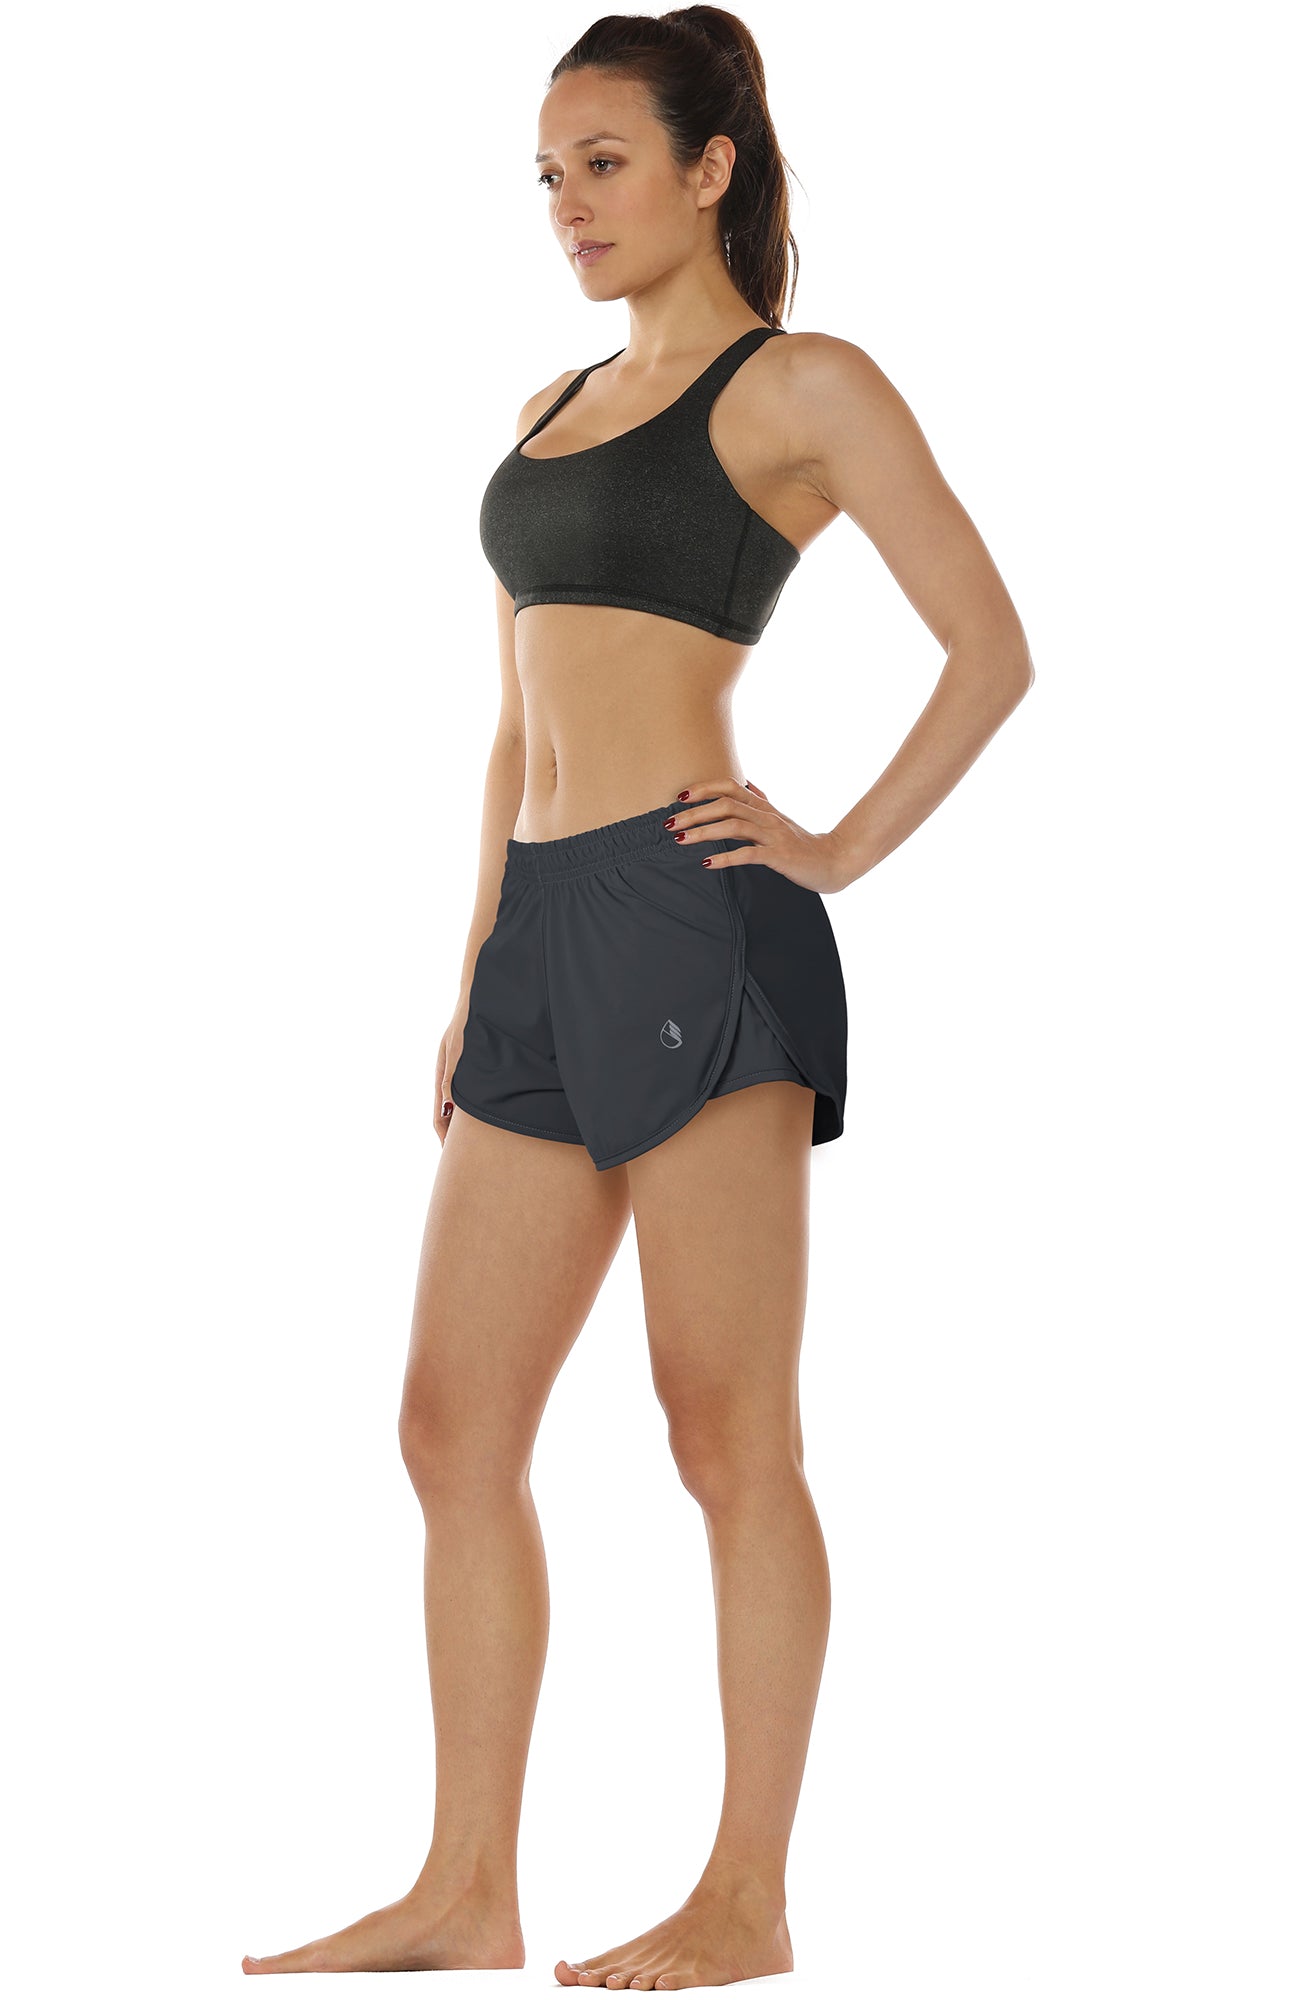 SP9 icyzone Running Yoga Shorts For Women - Activewear Workout